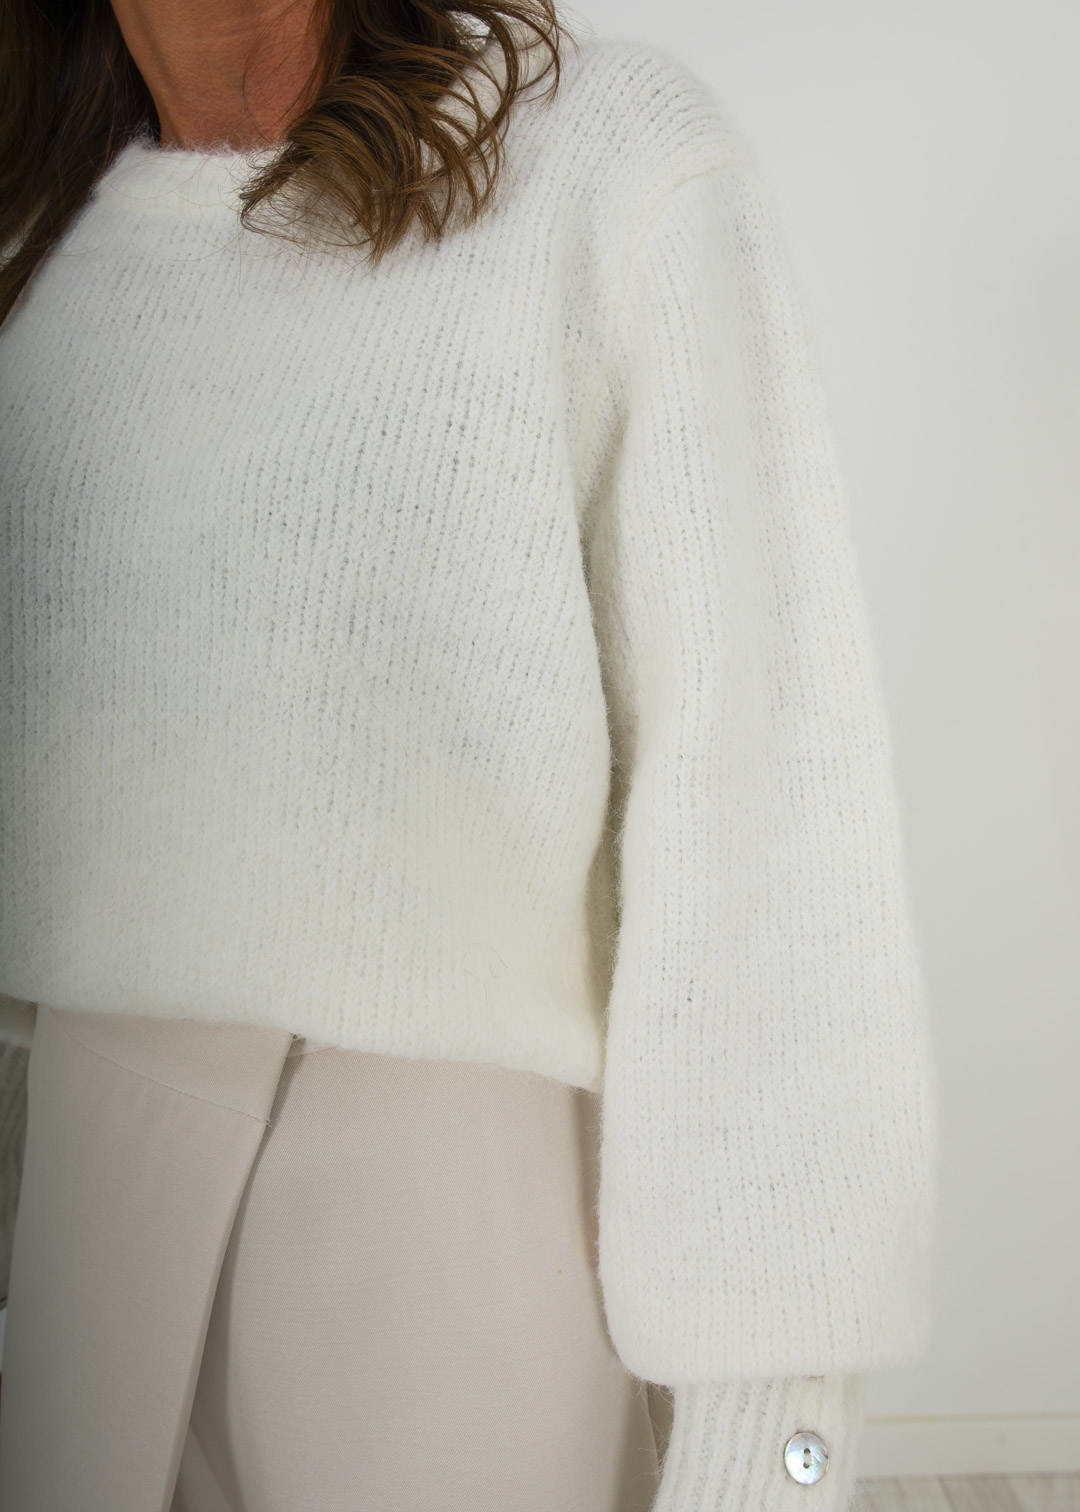 WHITE BUTTON SLEEVE SWEATER